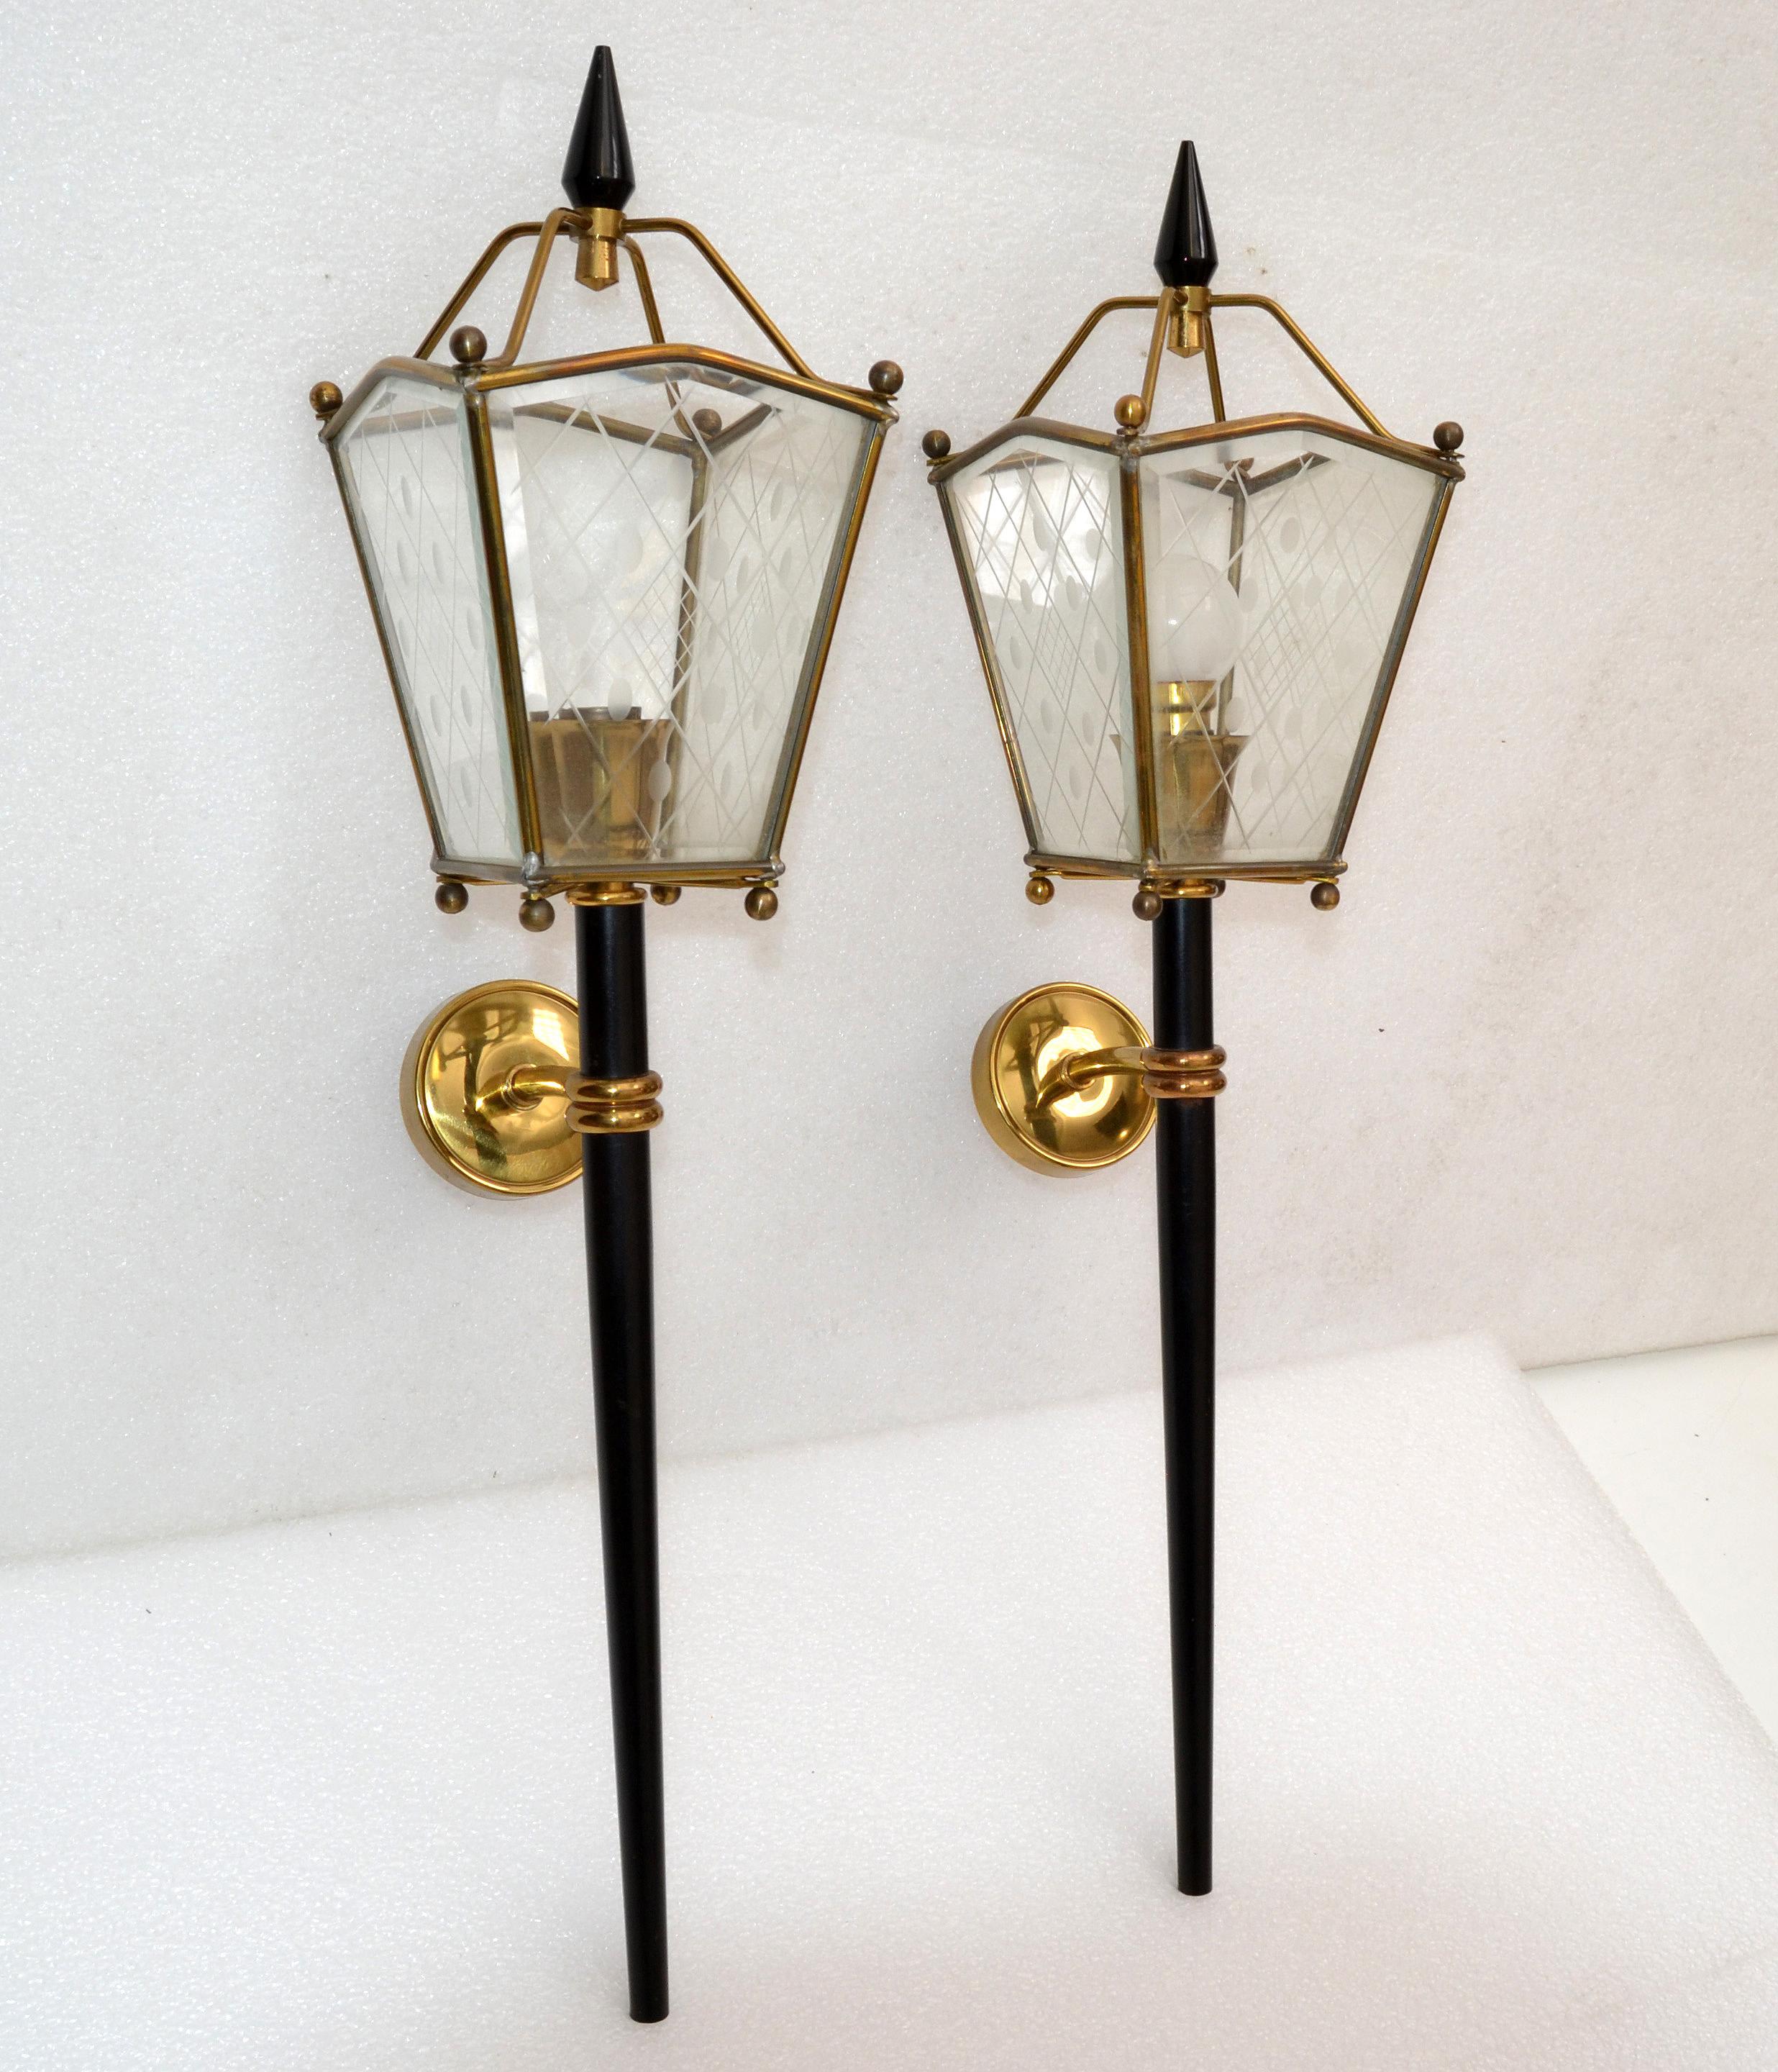 Pair of Jacques Adnet style sconces, wall lights, lantern lamps in brass, etched glass and gun metal.
In perfect working condition and each Sconce takes 1 light bulb max. 40 watts, or LED bulb.
Projection from the wall is 5 inches. Back Plate